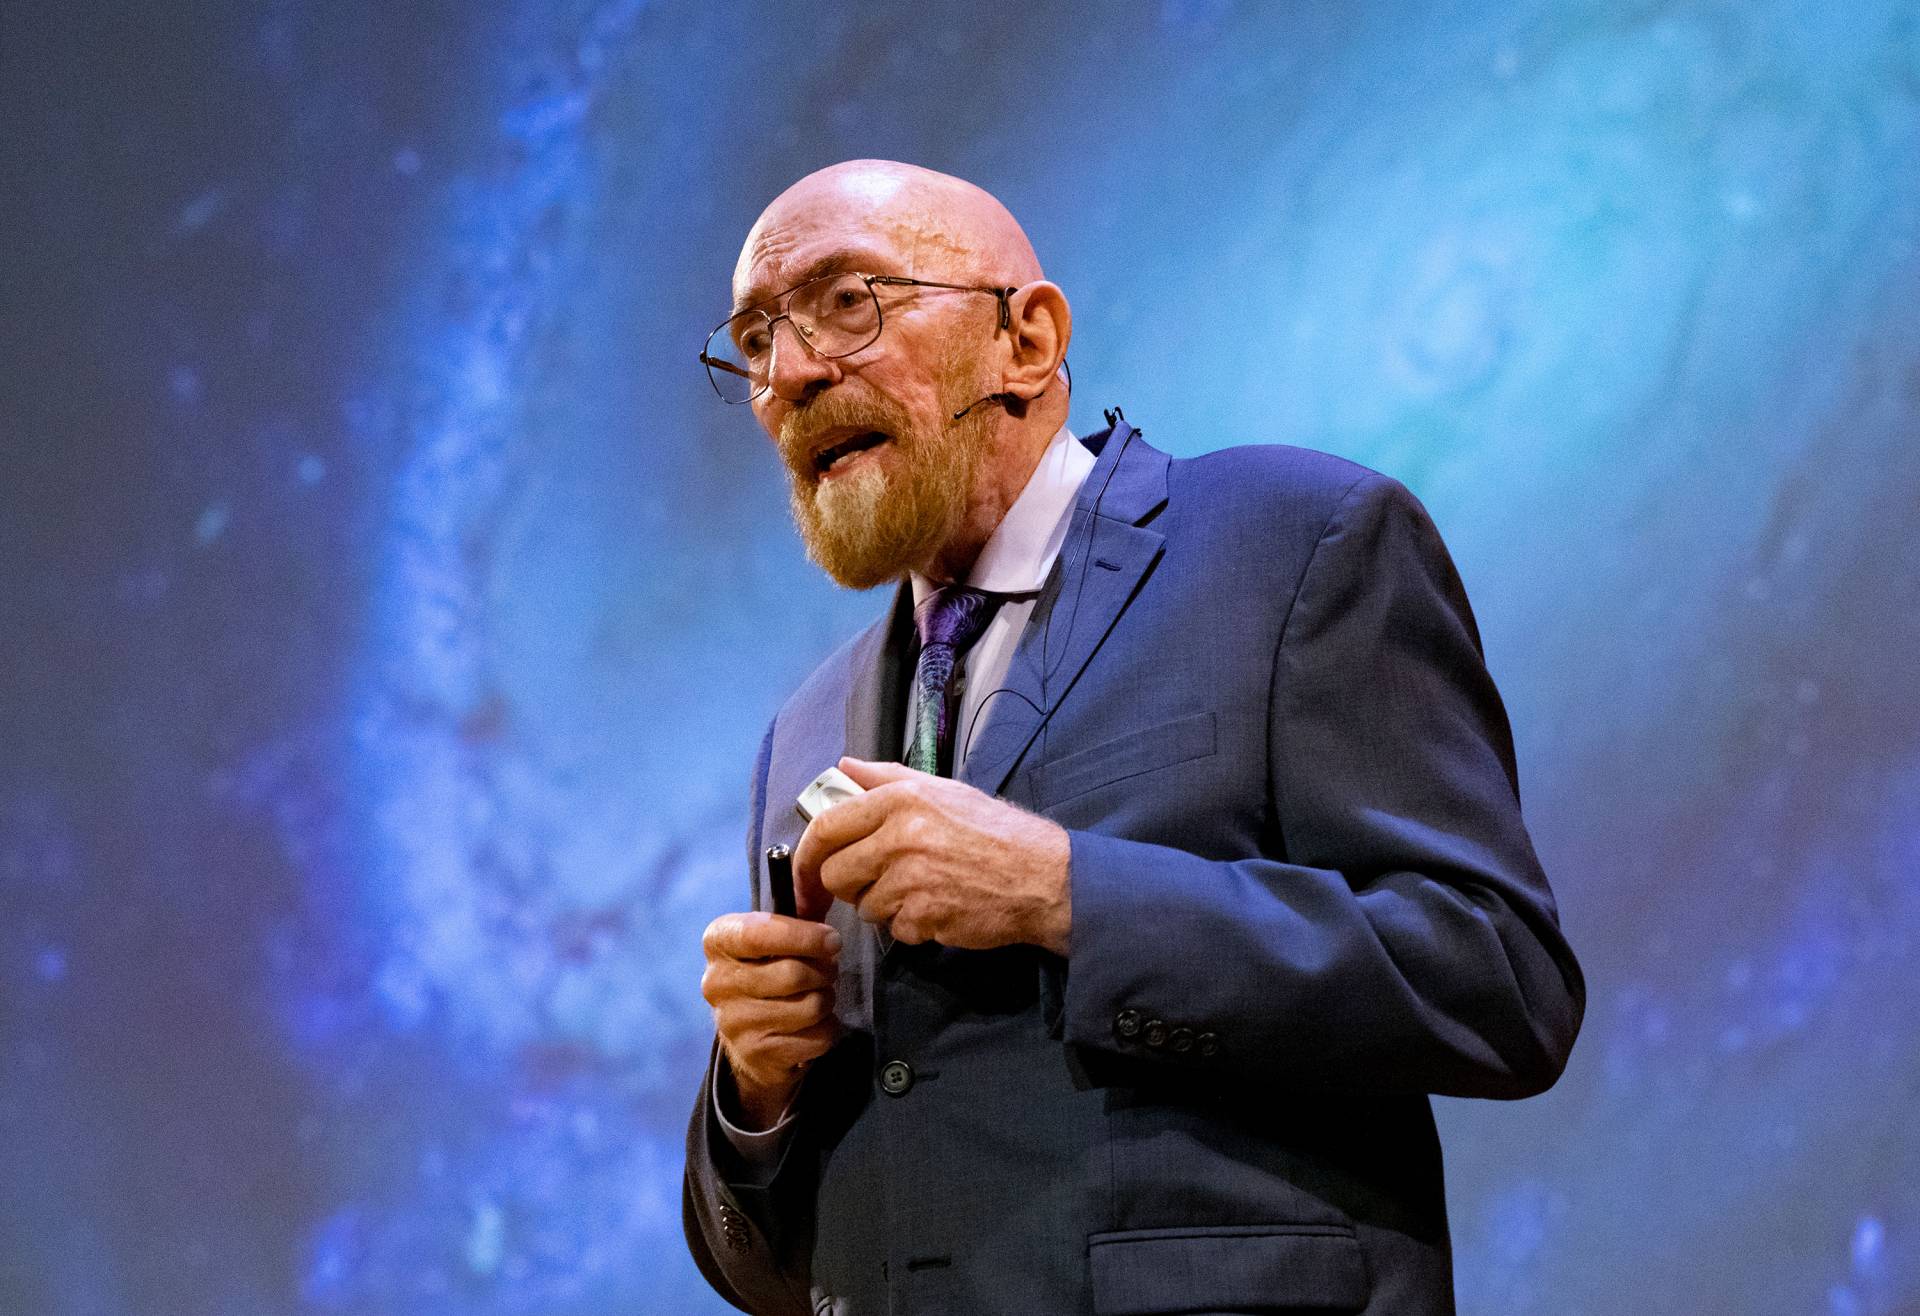 Kip Thorne in front of a projected image of the Milky Way